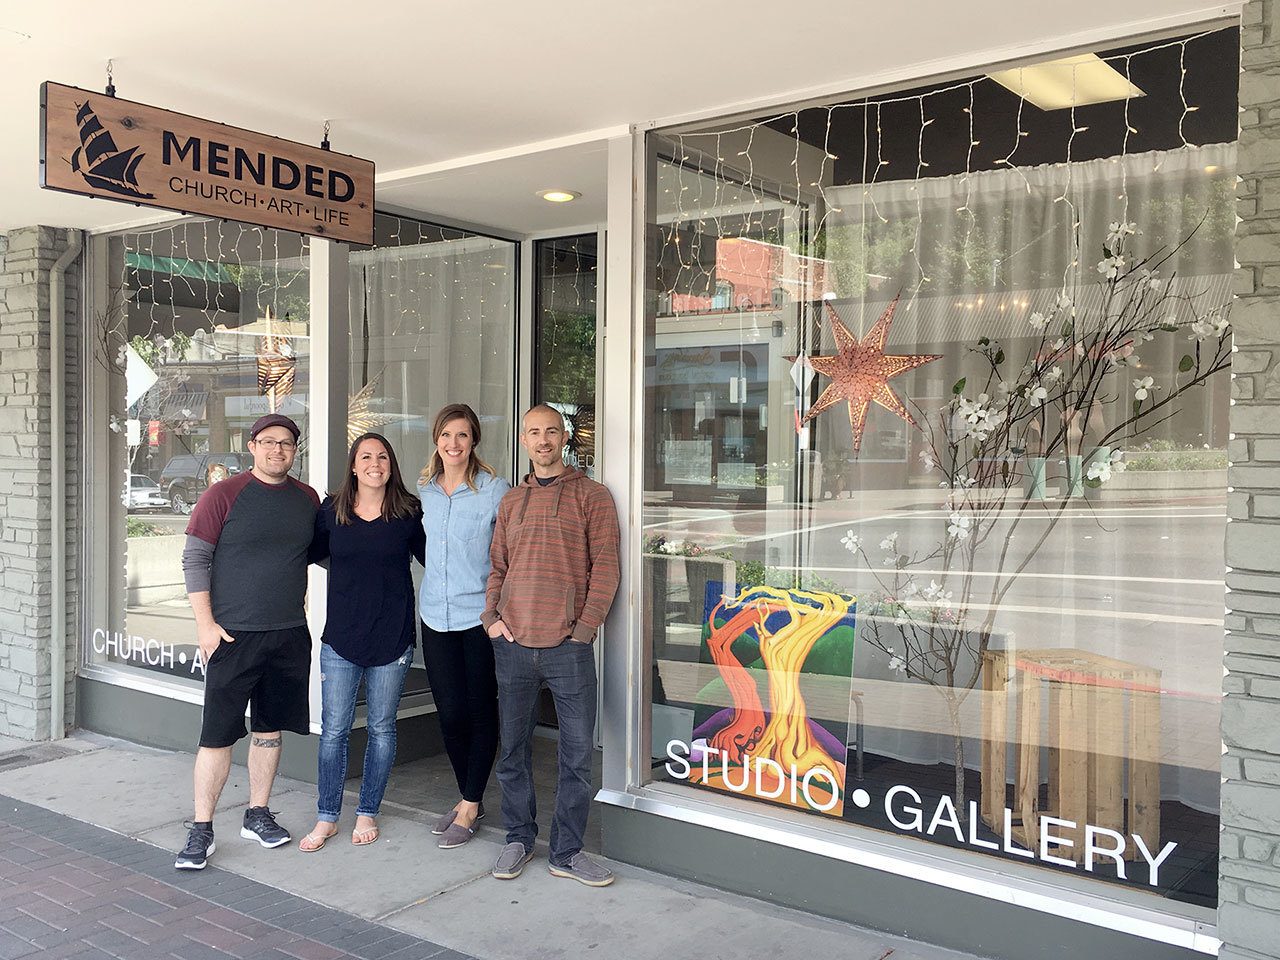 Mended Church will host a fundraiser for Feiro Marine Life Center from 6 to 9 p.m. at the Mended Giving Gallery, 123 E. 1st St., Suite 1A. Seen here from left are Cortland and Libby Waldron, and Makayla and Joe DeScala of Mended Church. — Mended Church.